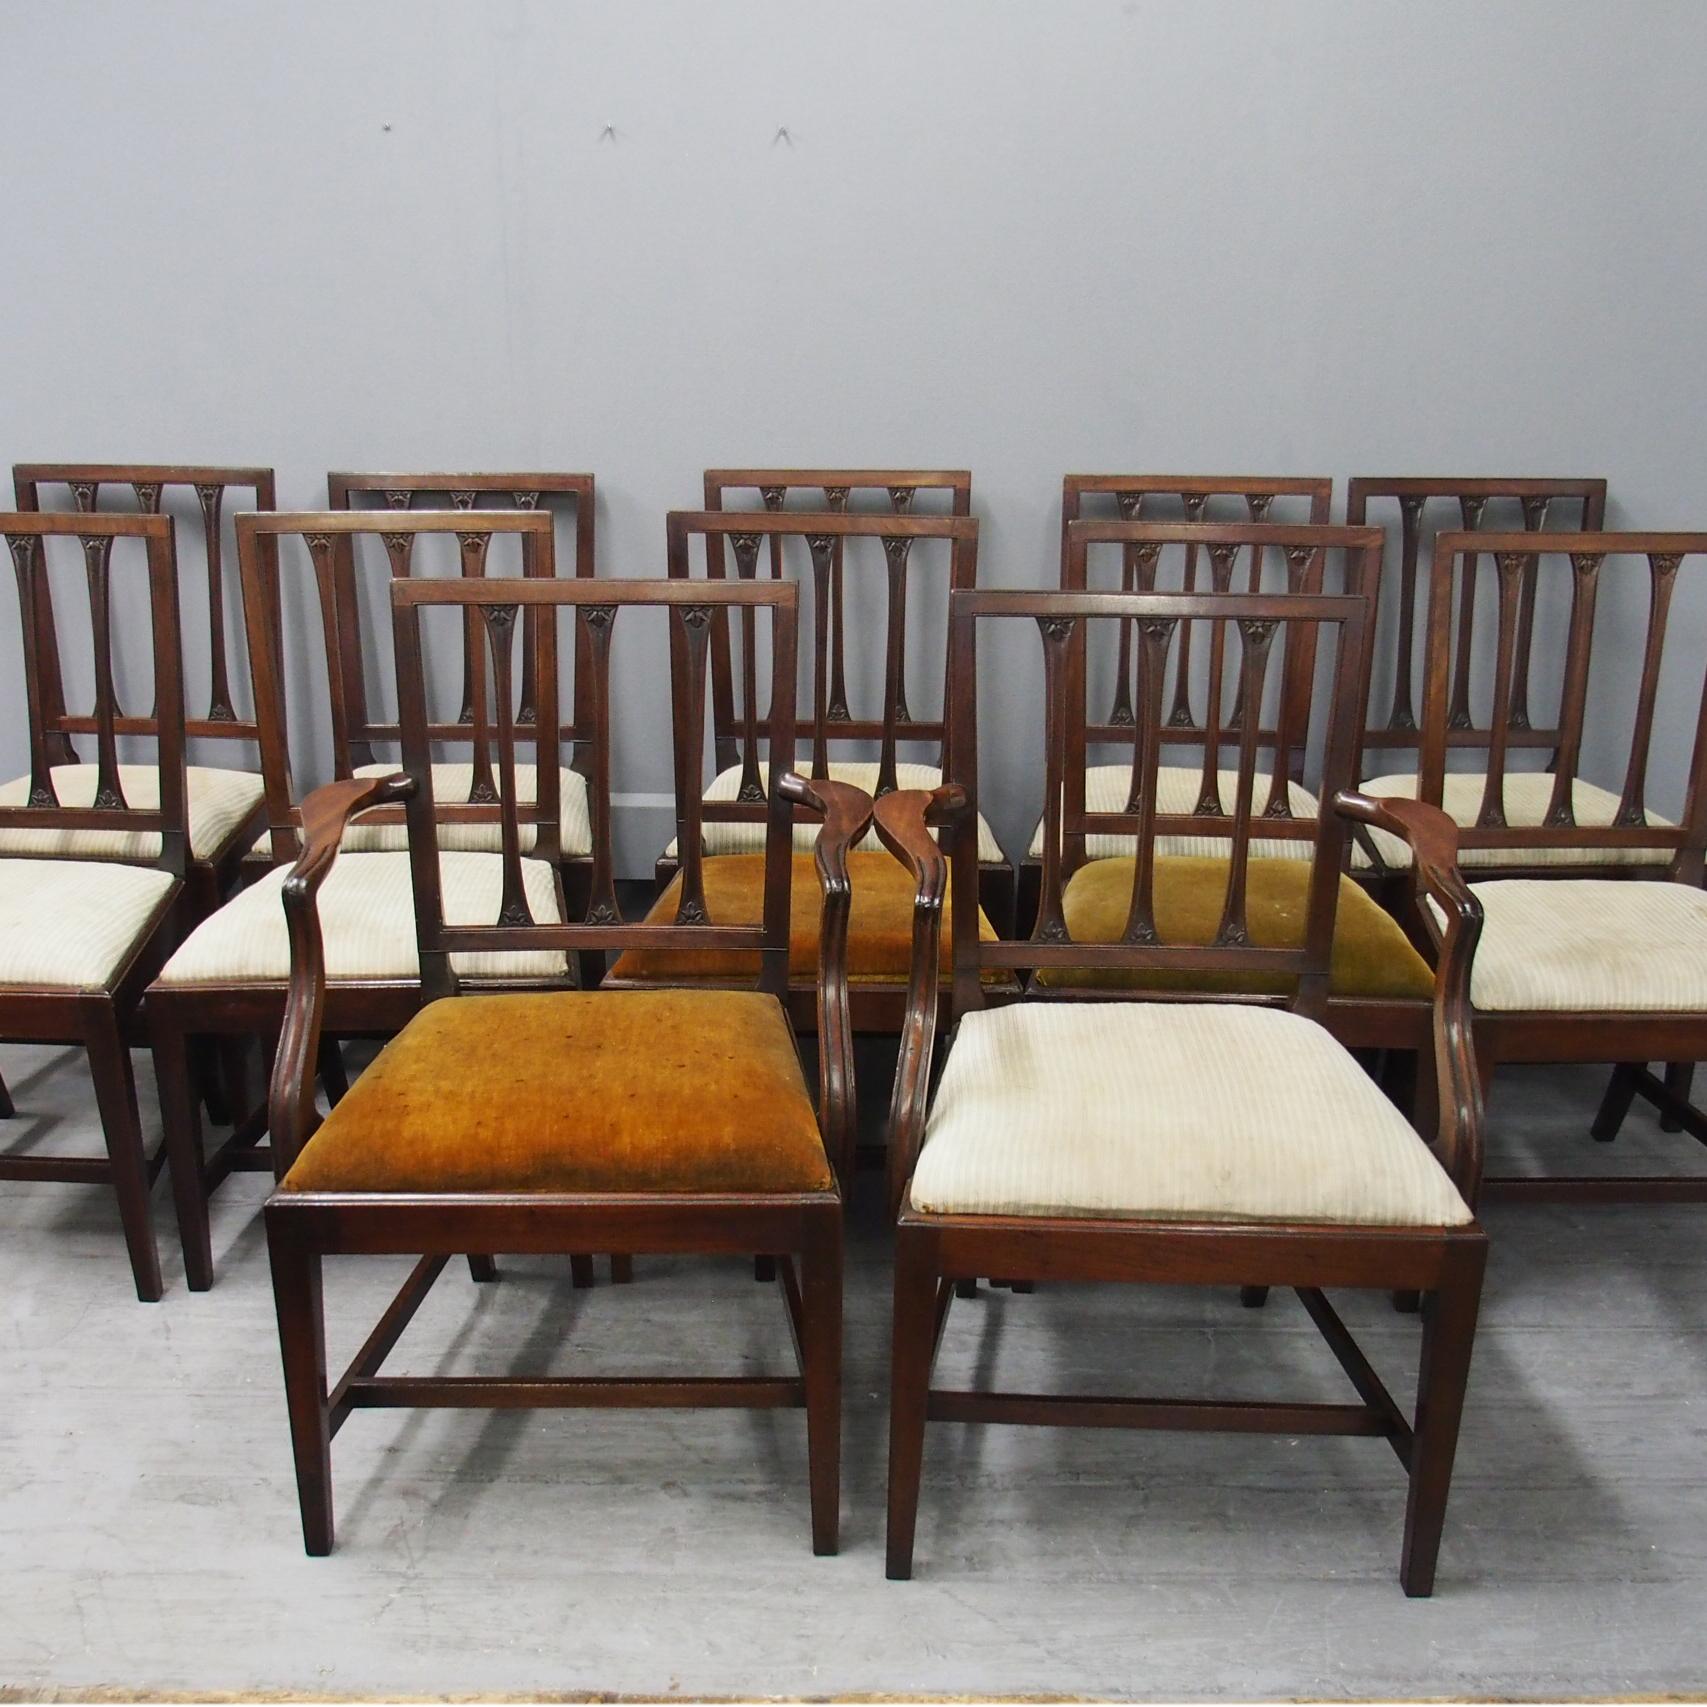 Rare original set of 12 (10 +2) Scottish George III mahogany dining chairs with Sheraton influence, circa 1780. The narrow reeded top rail is supported by 3 narrow splats with flared and foliate carved ends, leading on to outswept arms over